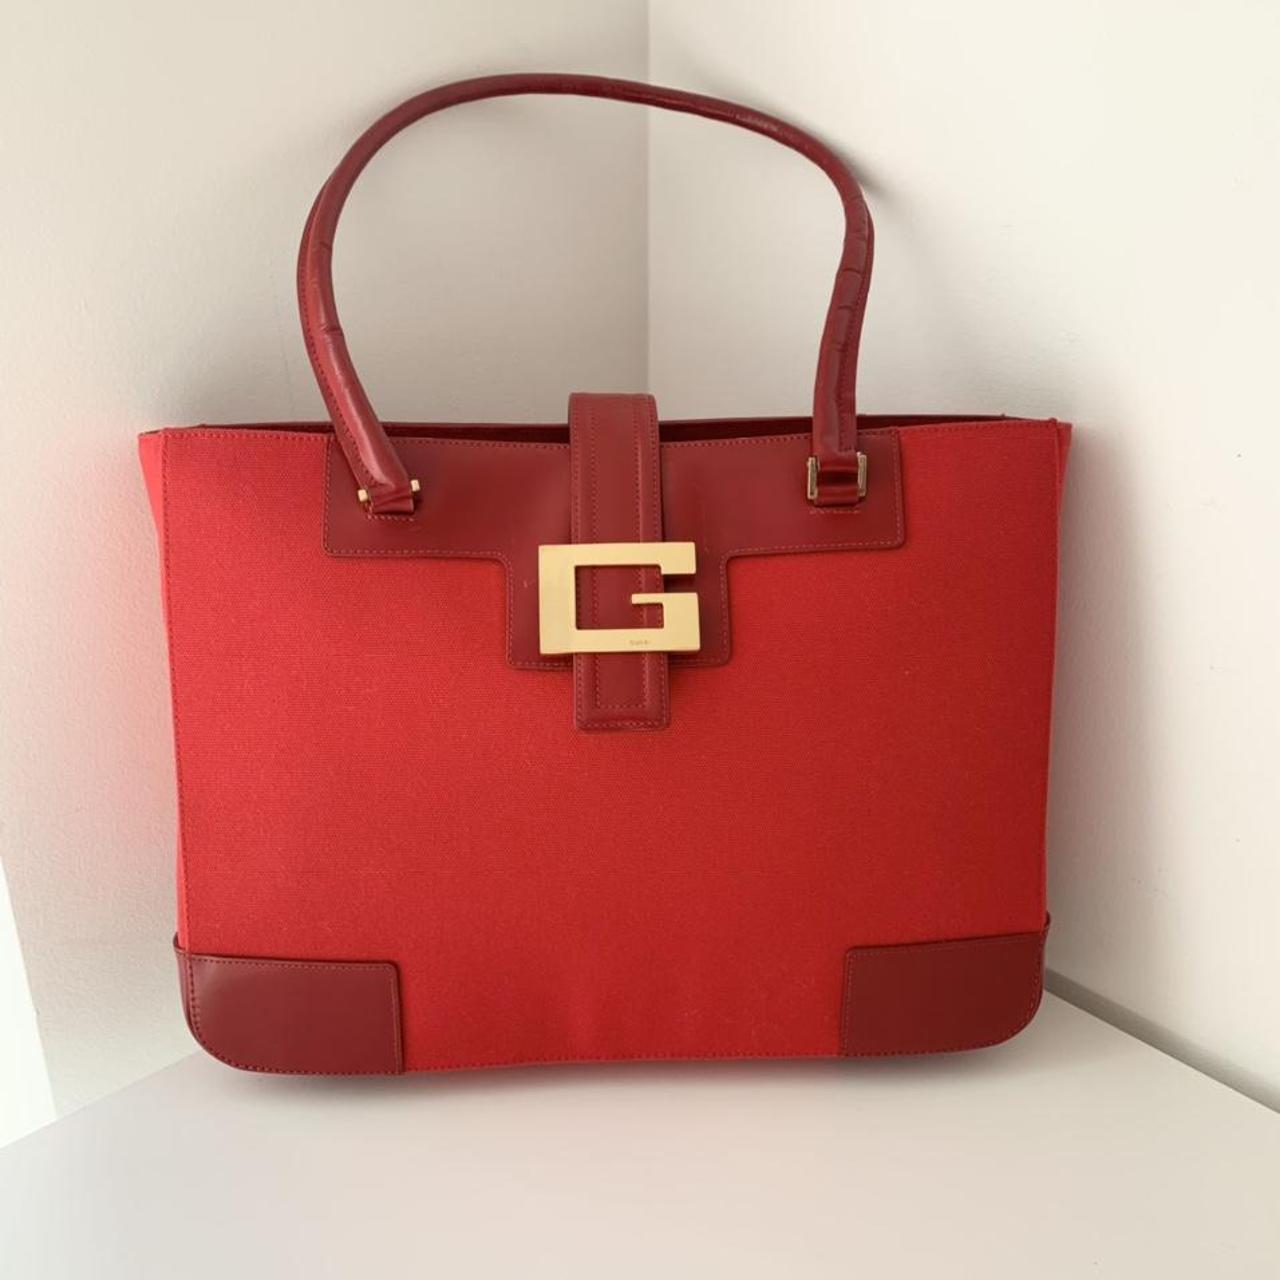 GUCCI Authentic Gucci Shoulder Bag Red Leather With... - Depop